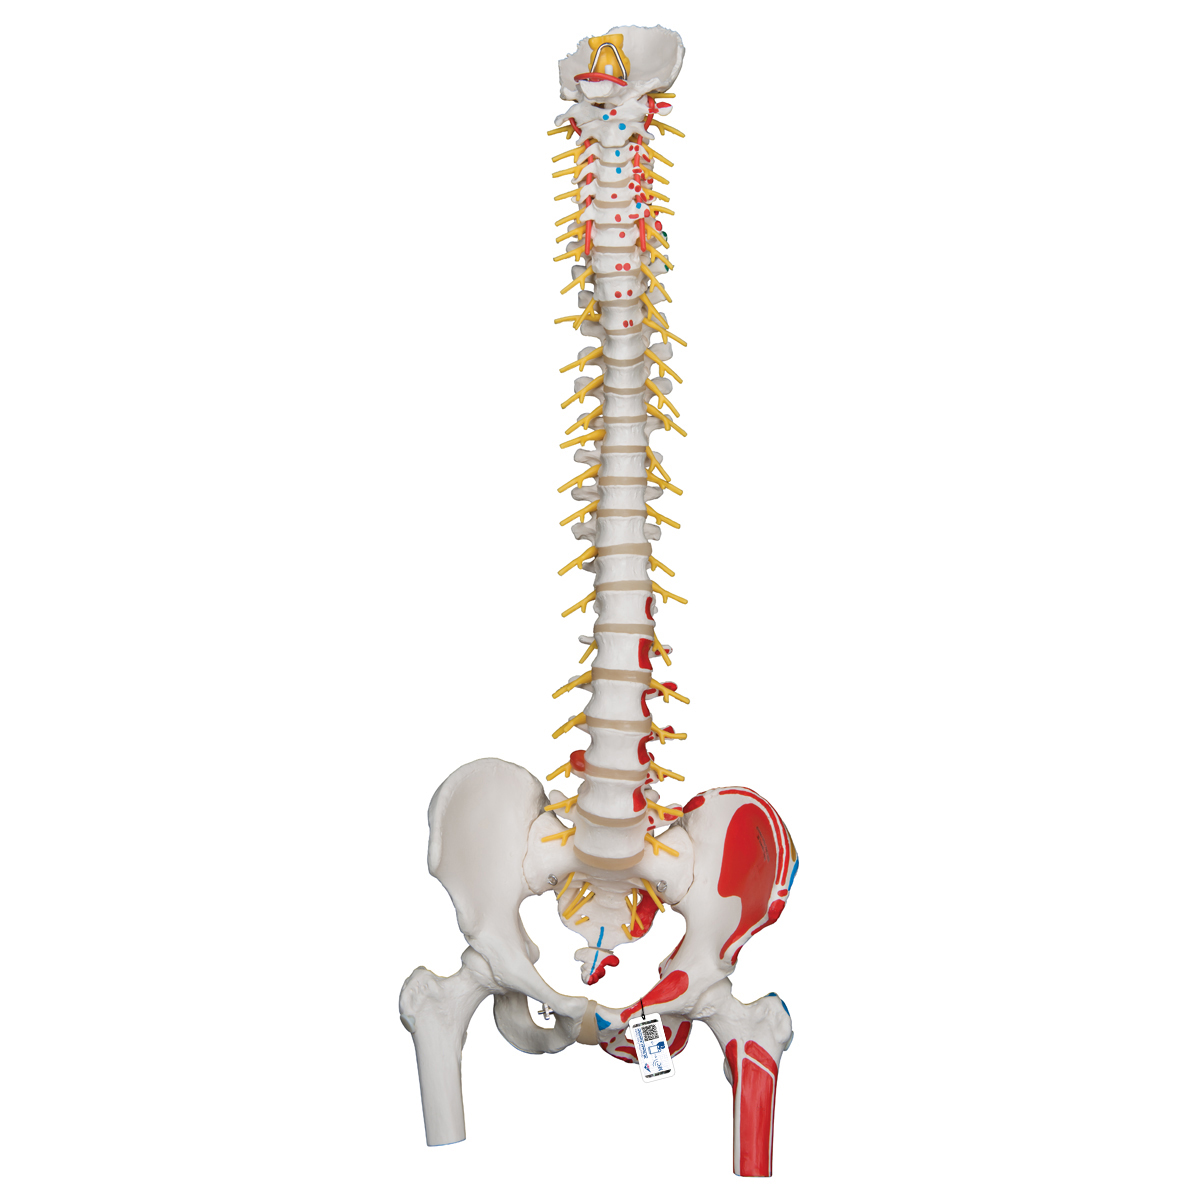 Plastic Spinal Column - Vertebrae Model - Deluxe Flexible Spine with Femur  Head and Painted Muscles